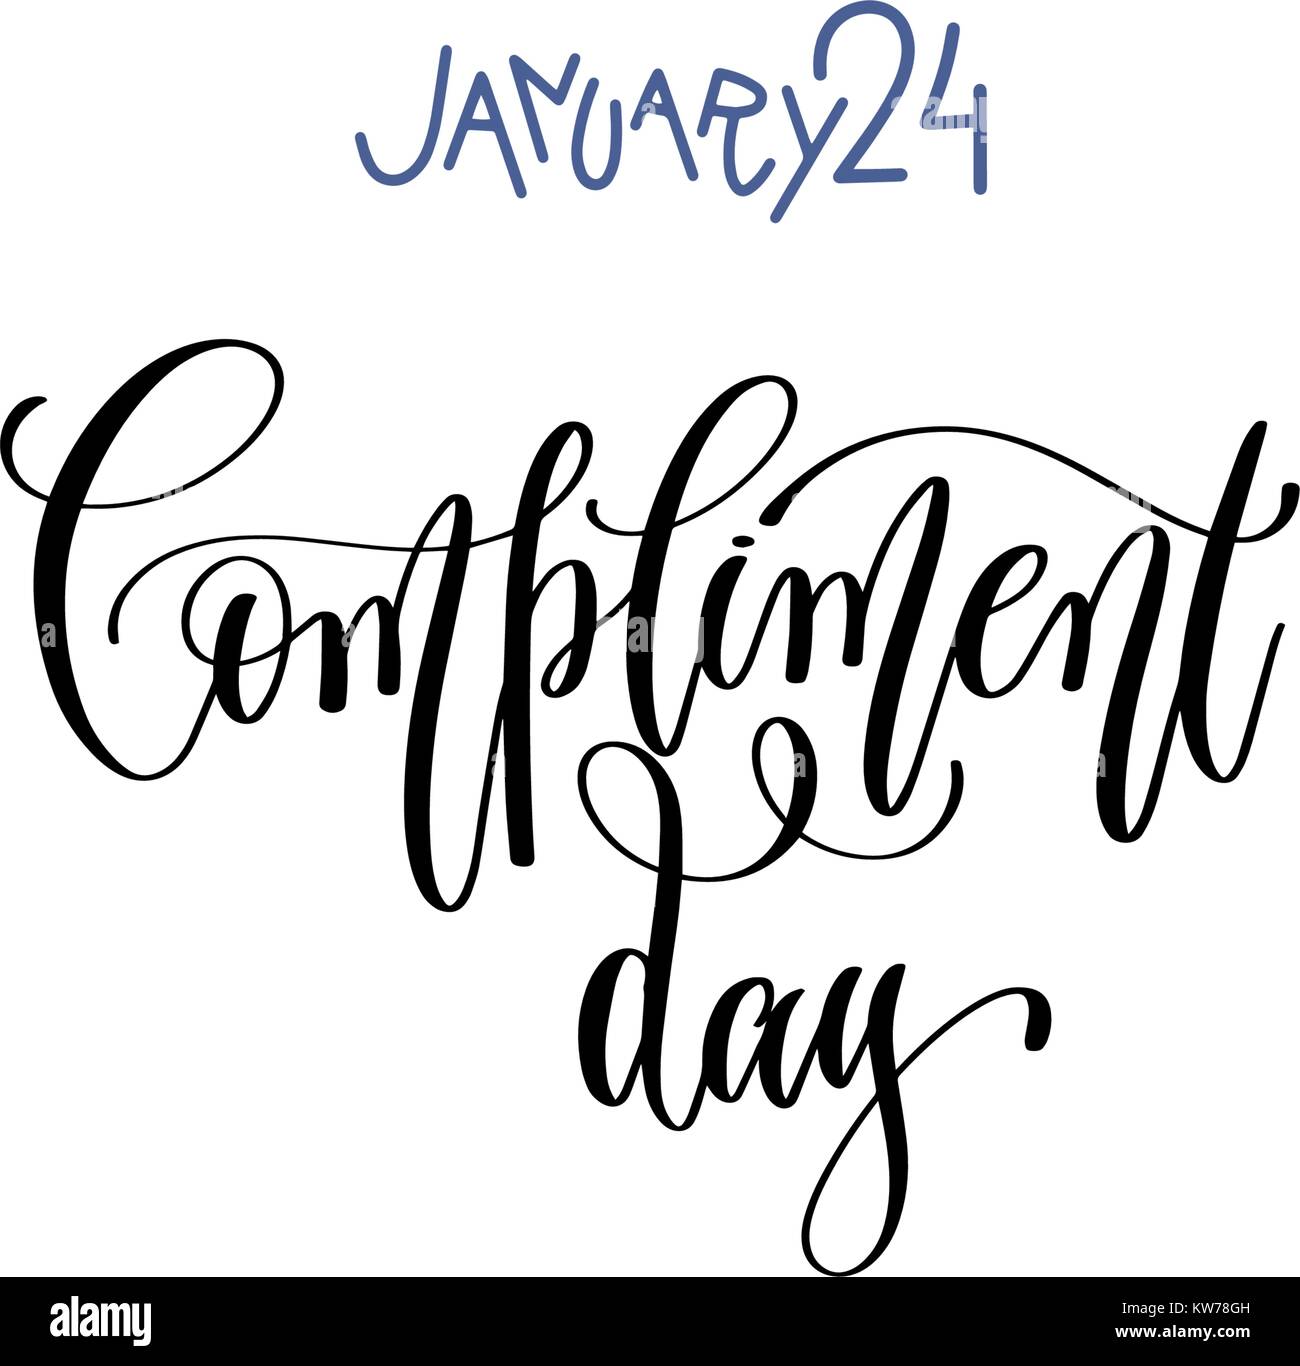 january 24 - compliment day - hand lettering inscription text Stock Vector